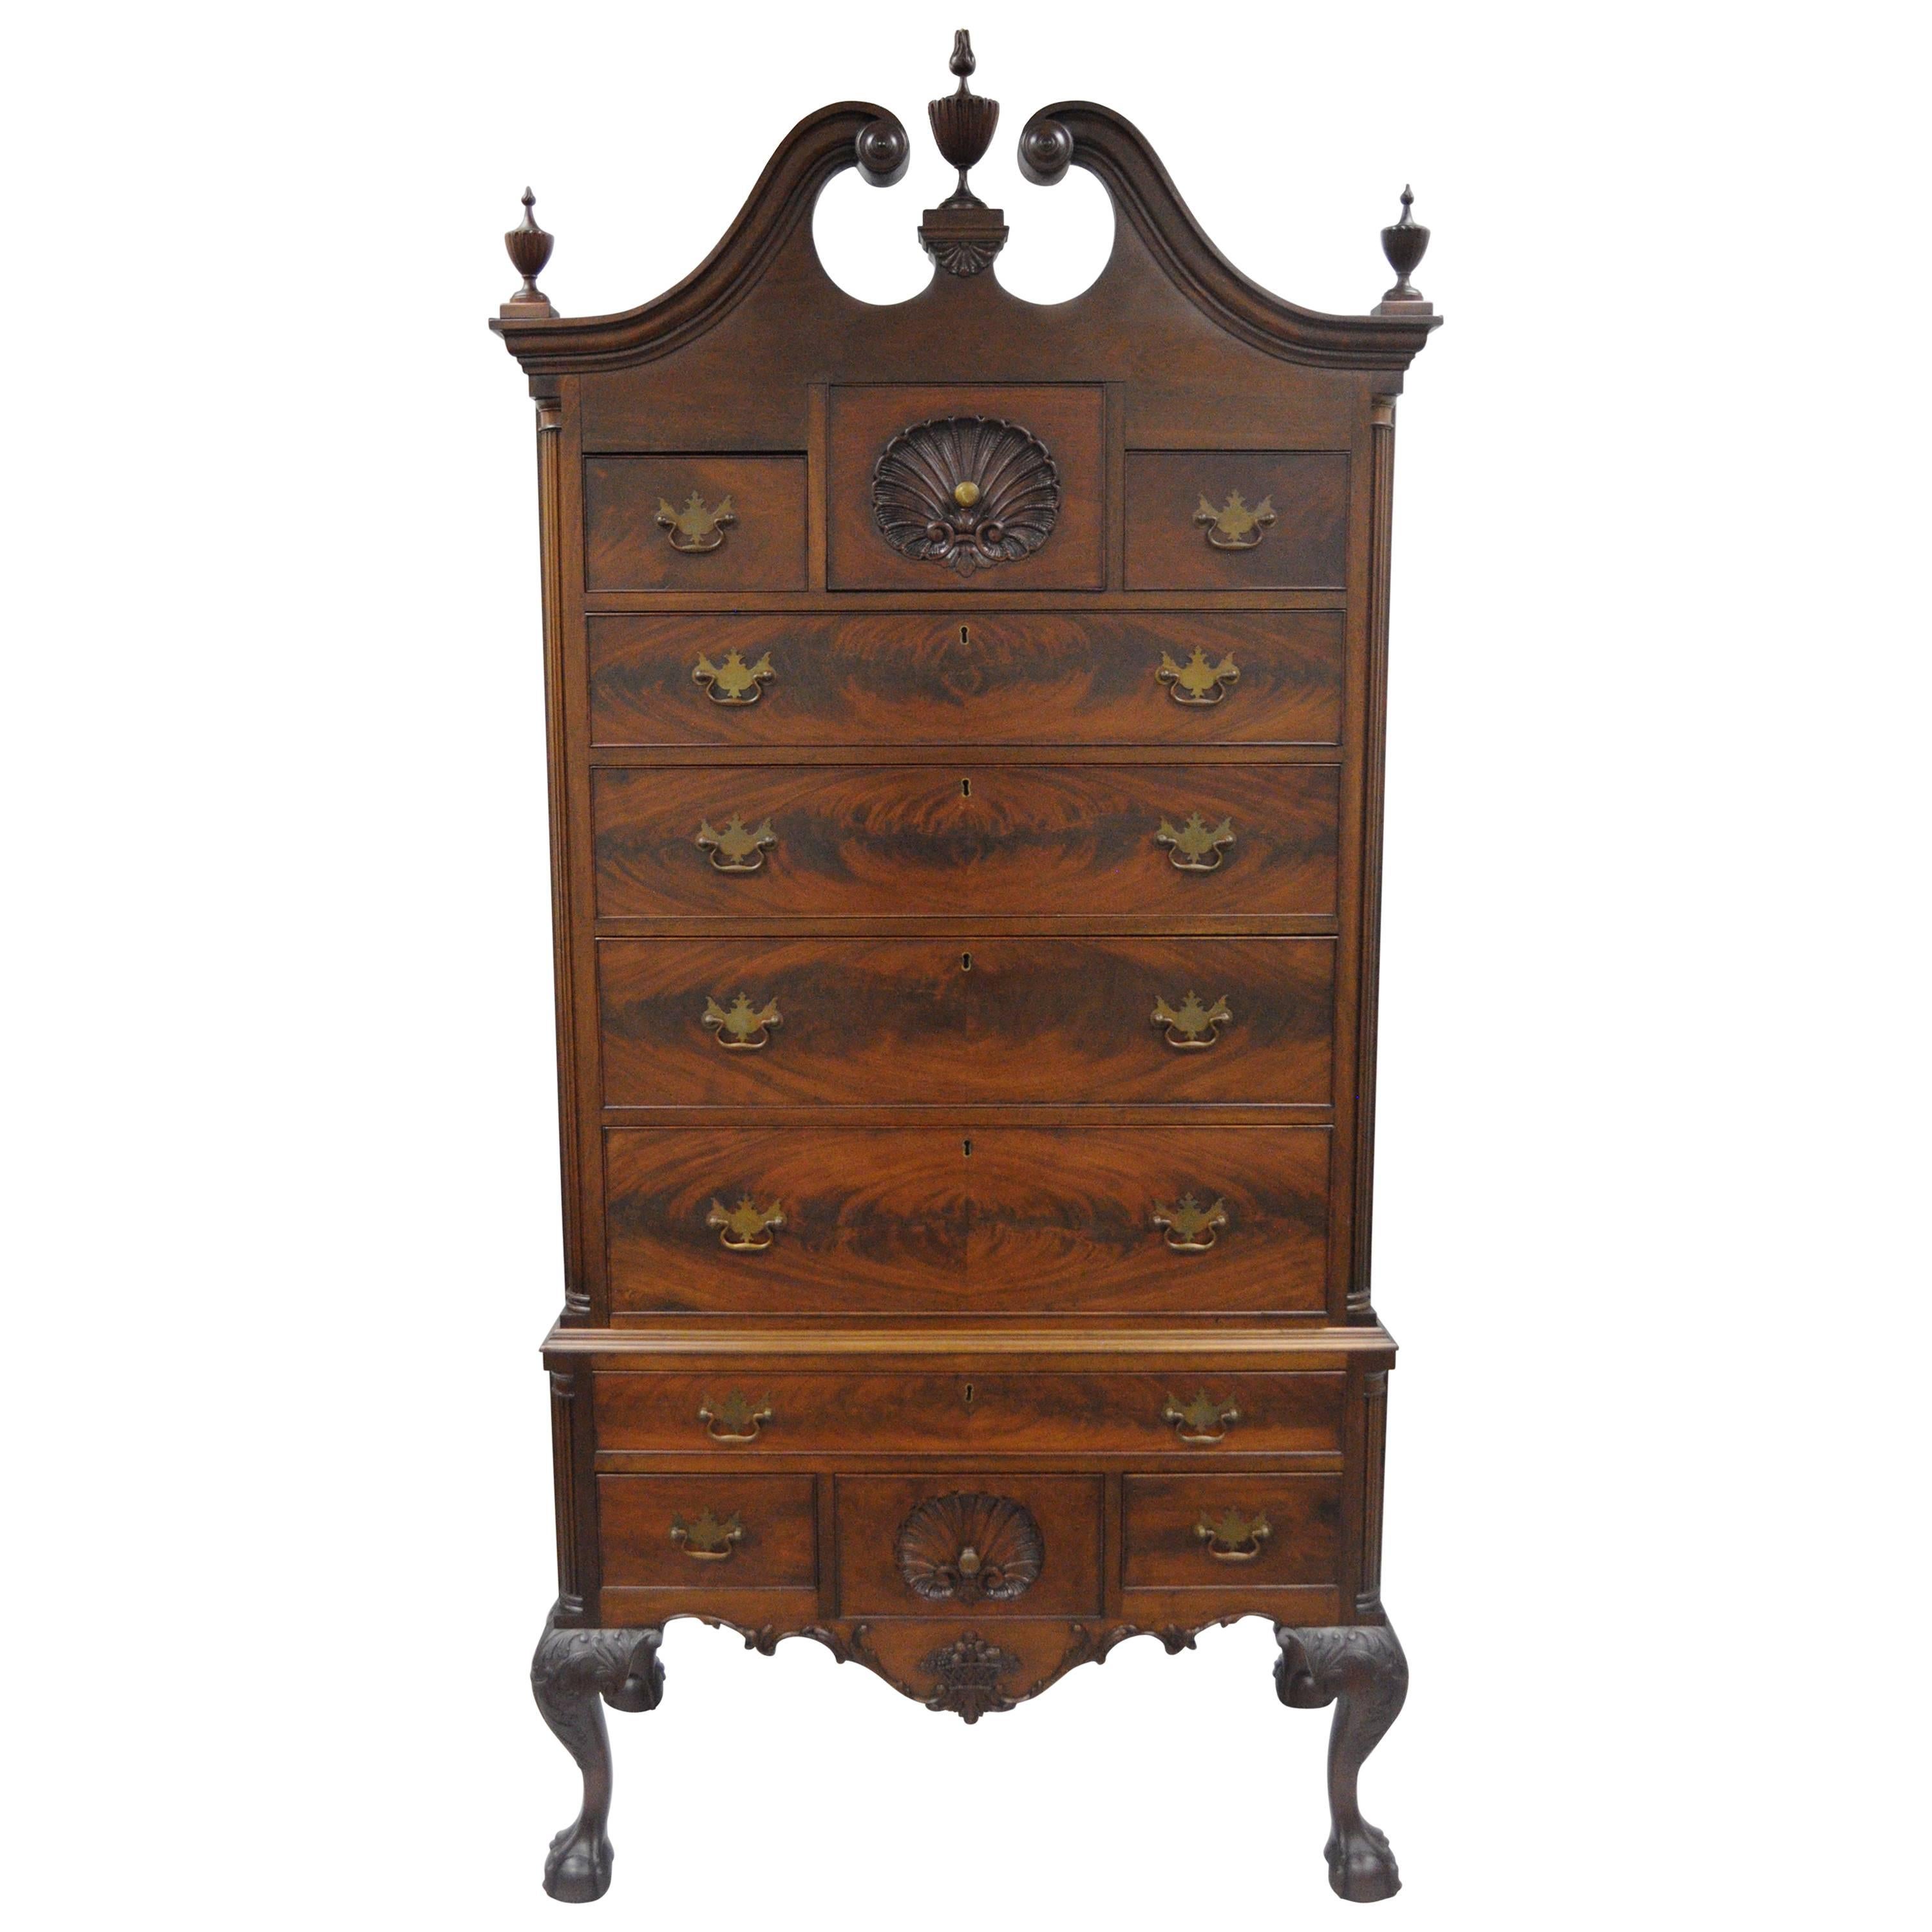 19th C. Crotch Mahogany Chippendale Ball and Claw Highboy Tall Chest of Drawers